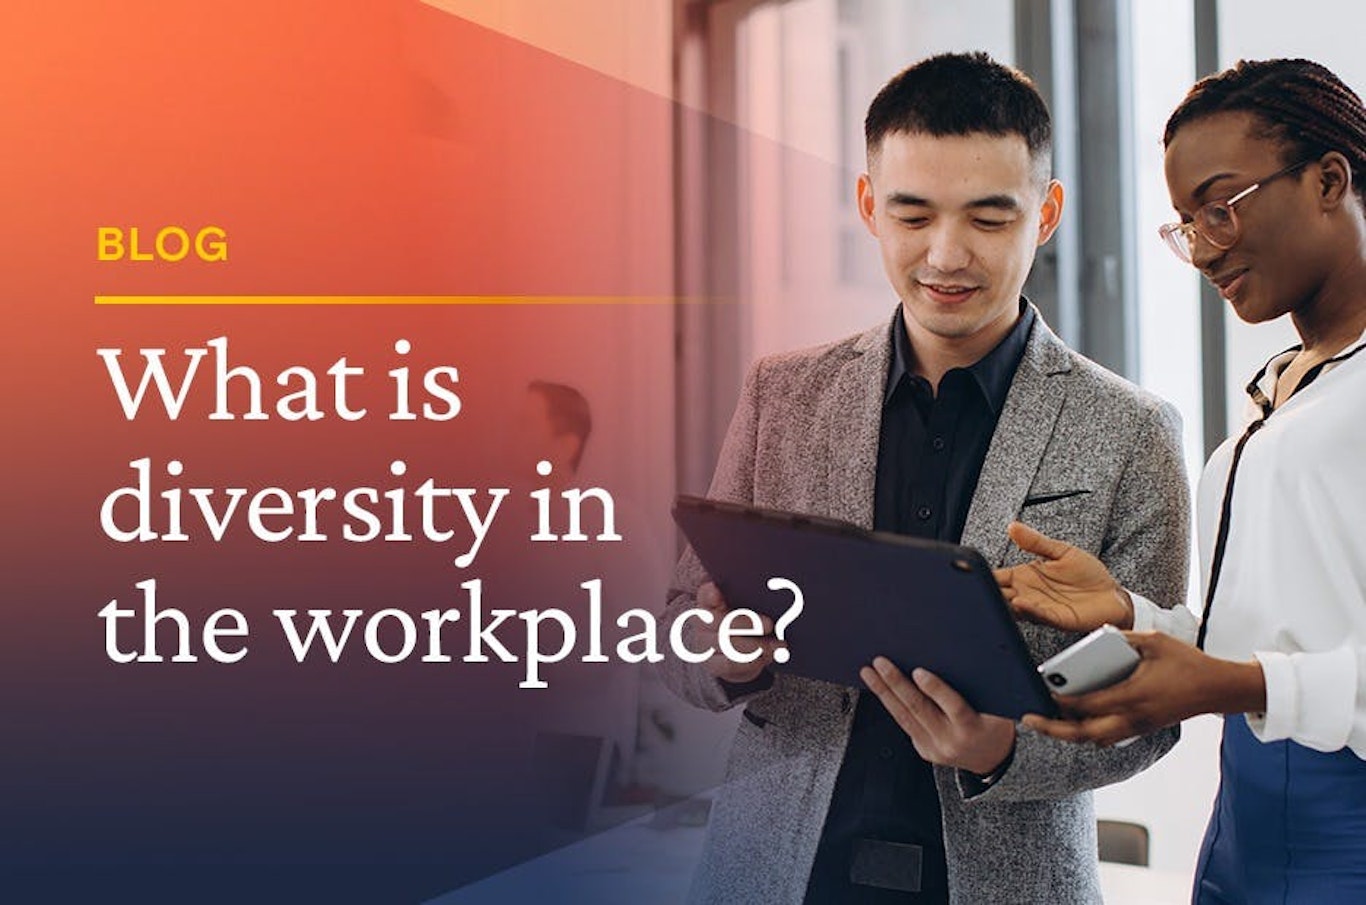 diversity in the workplace blog header image